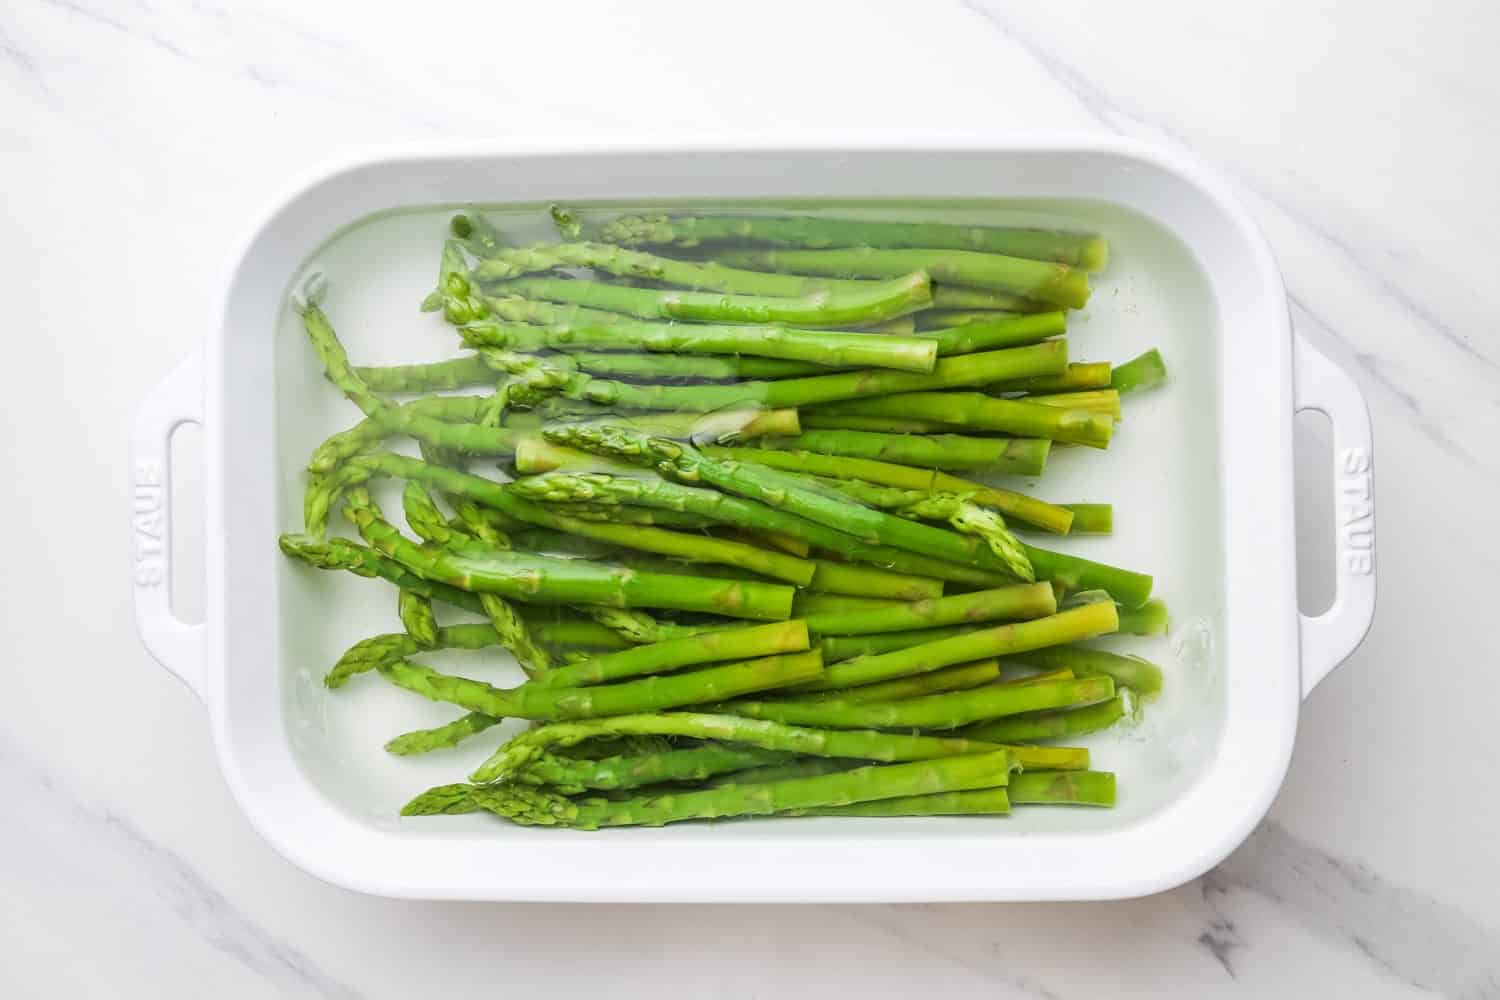 Plunging blanched asparagus in ice water in a staub dish